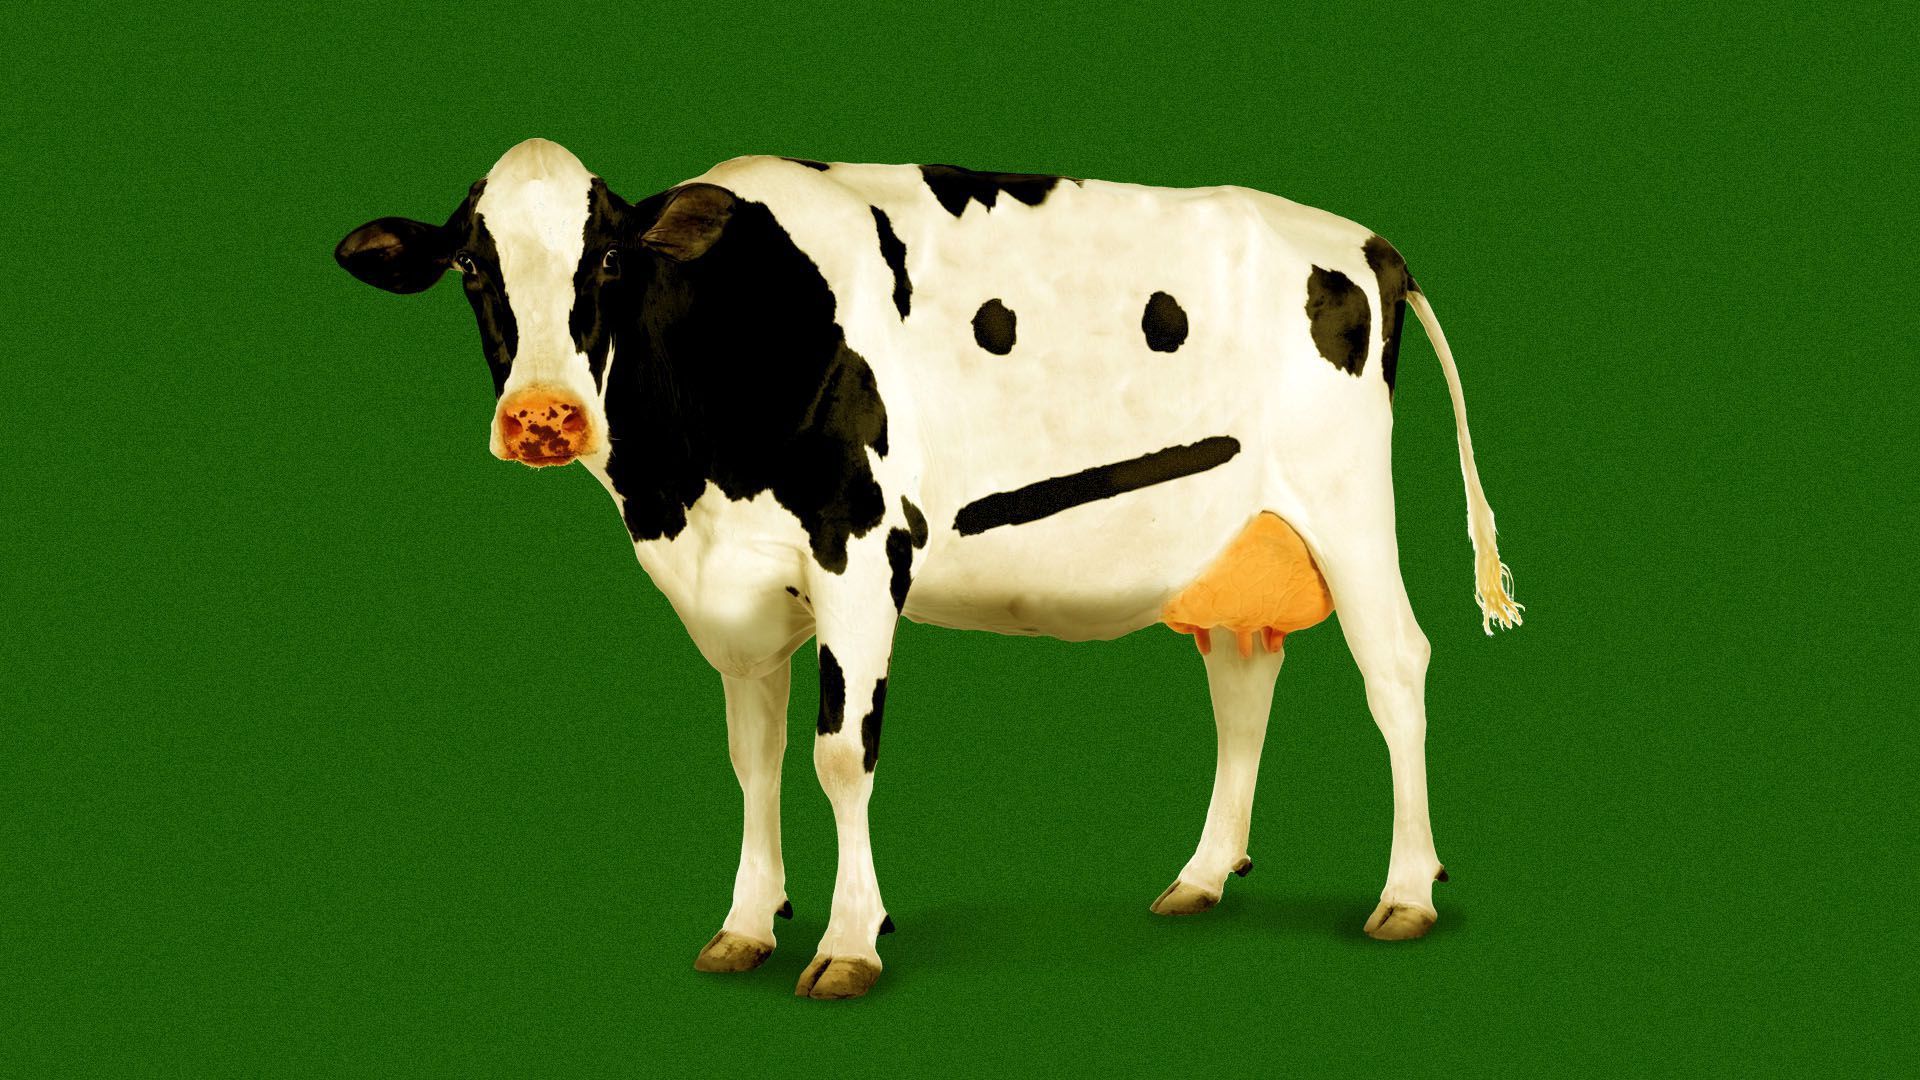 illustration of a cow with a face on it